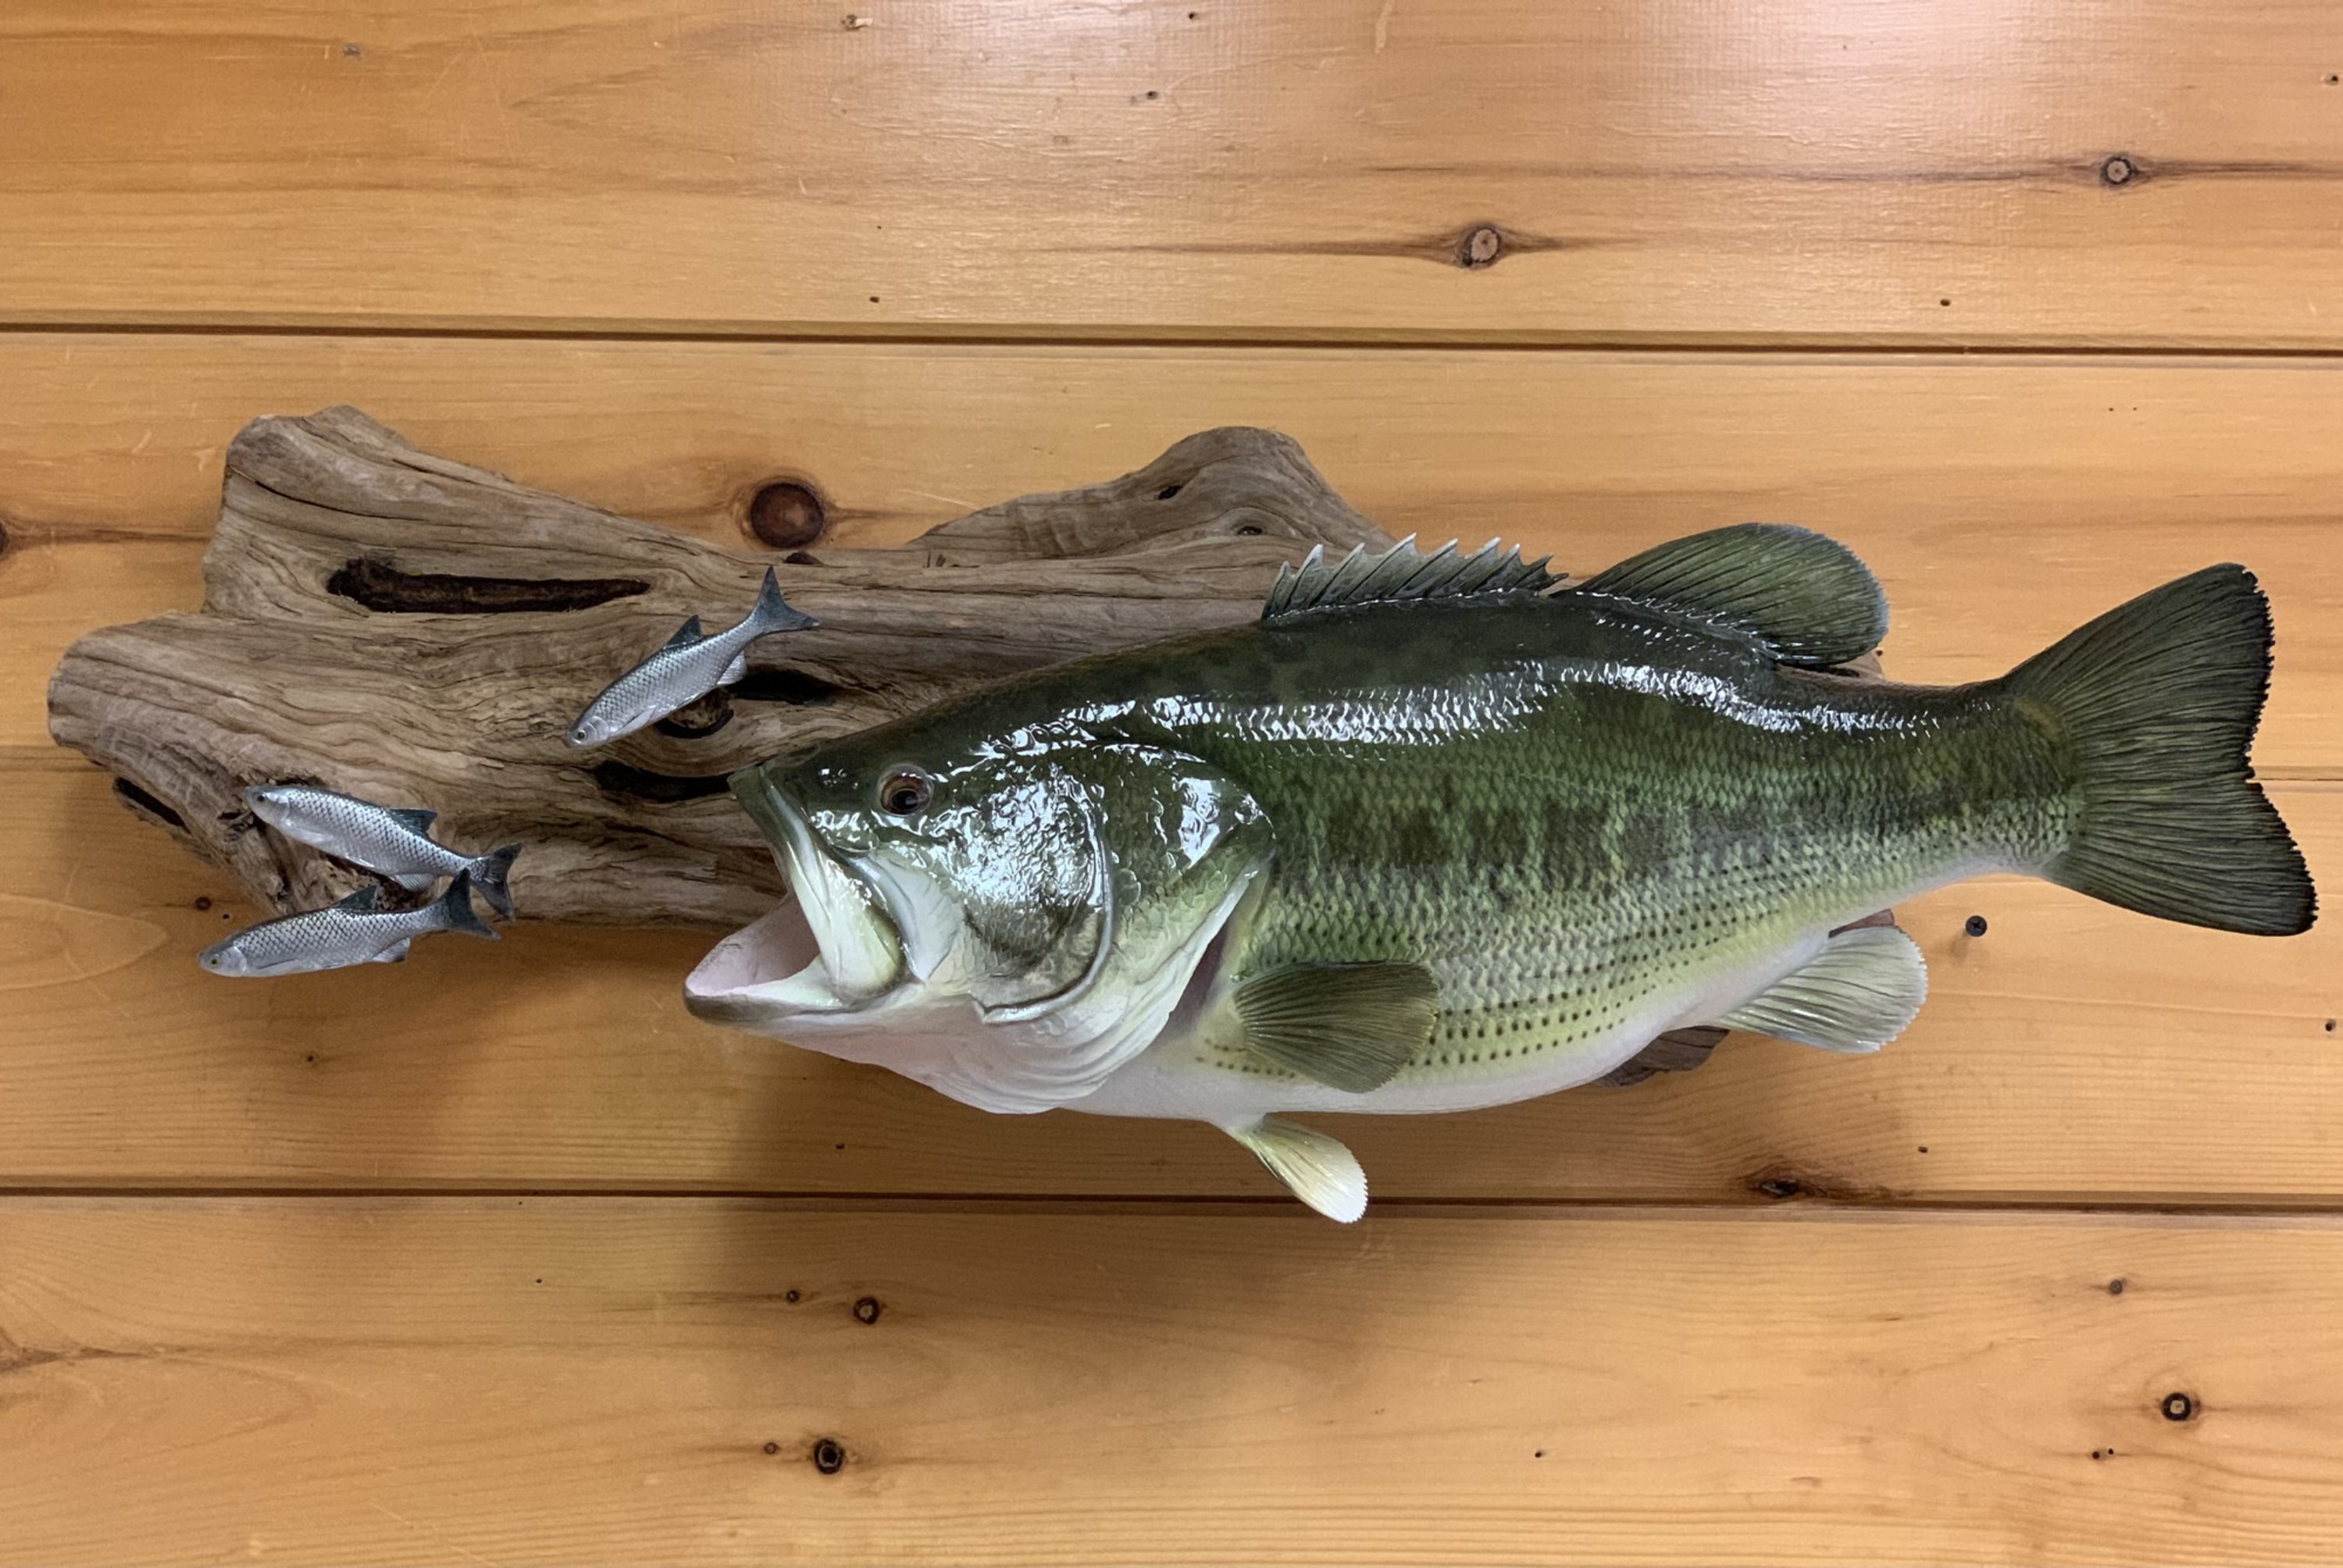 Largemouth Bass Taxidermy Fish Mount For Sale